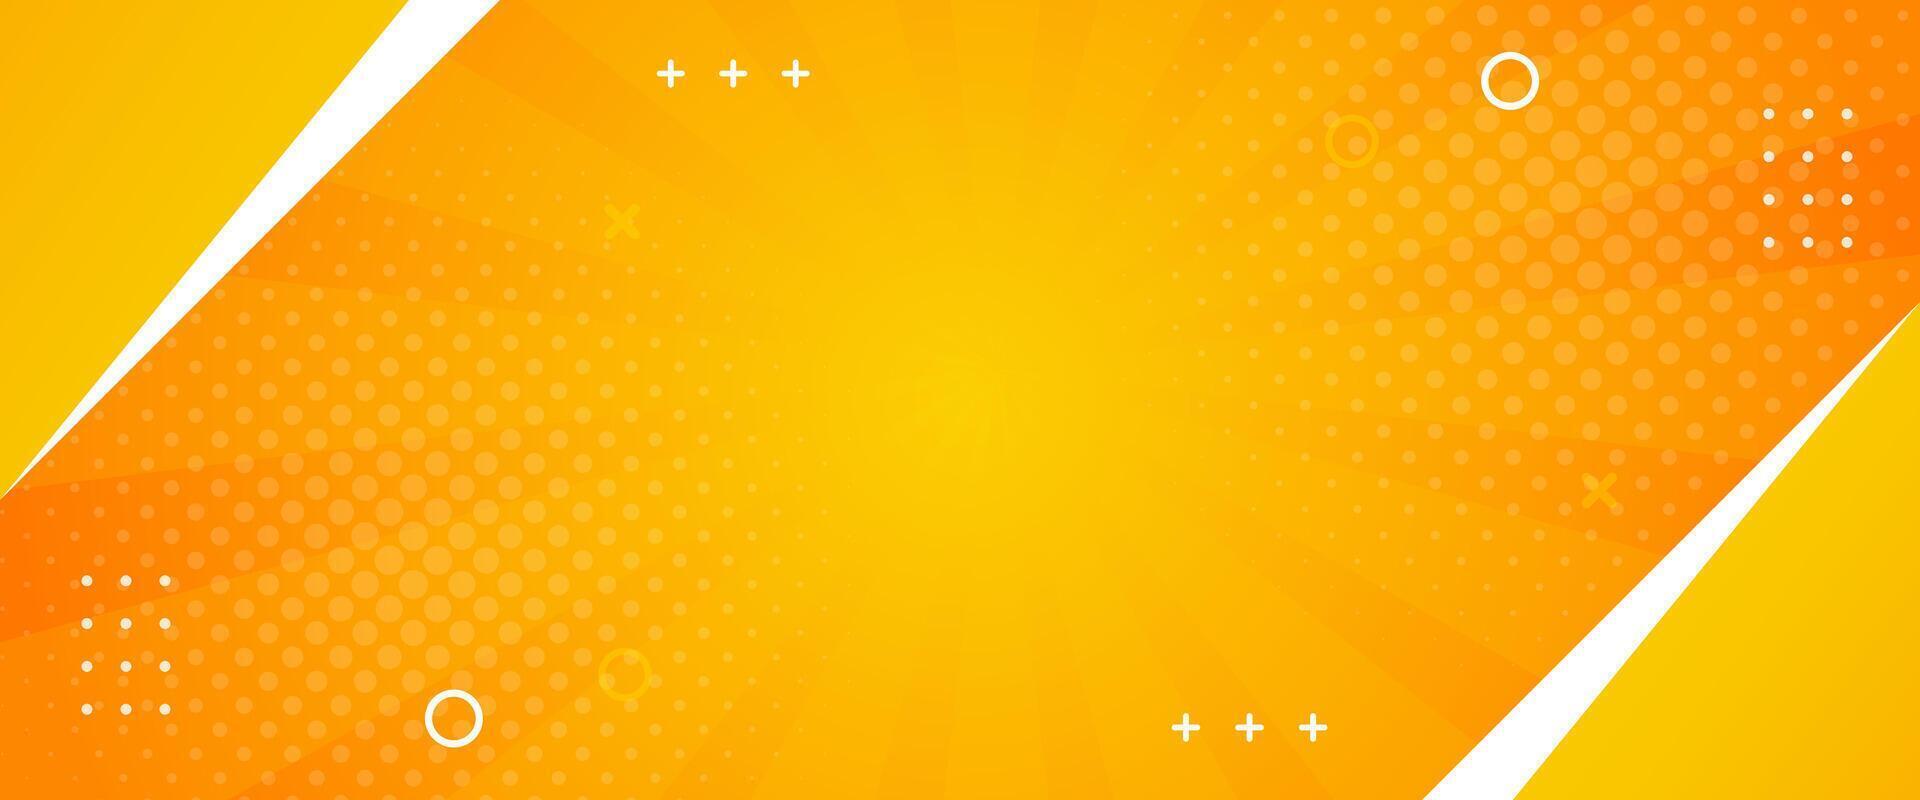 Abstract orange geometric banner background. Orange comic sunburst effect background with halftone. Suitable for templates, sales banners, events, ads, web, and headers vector